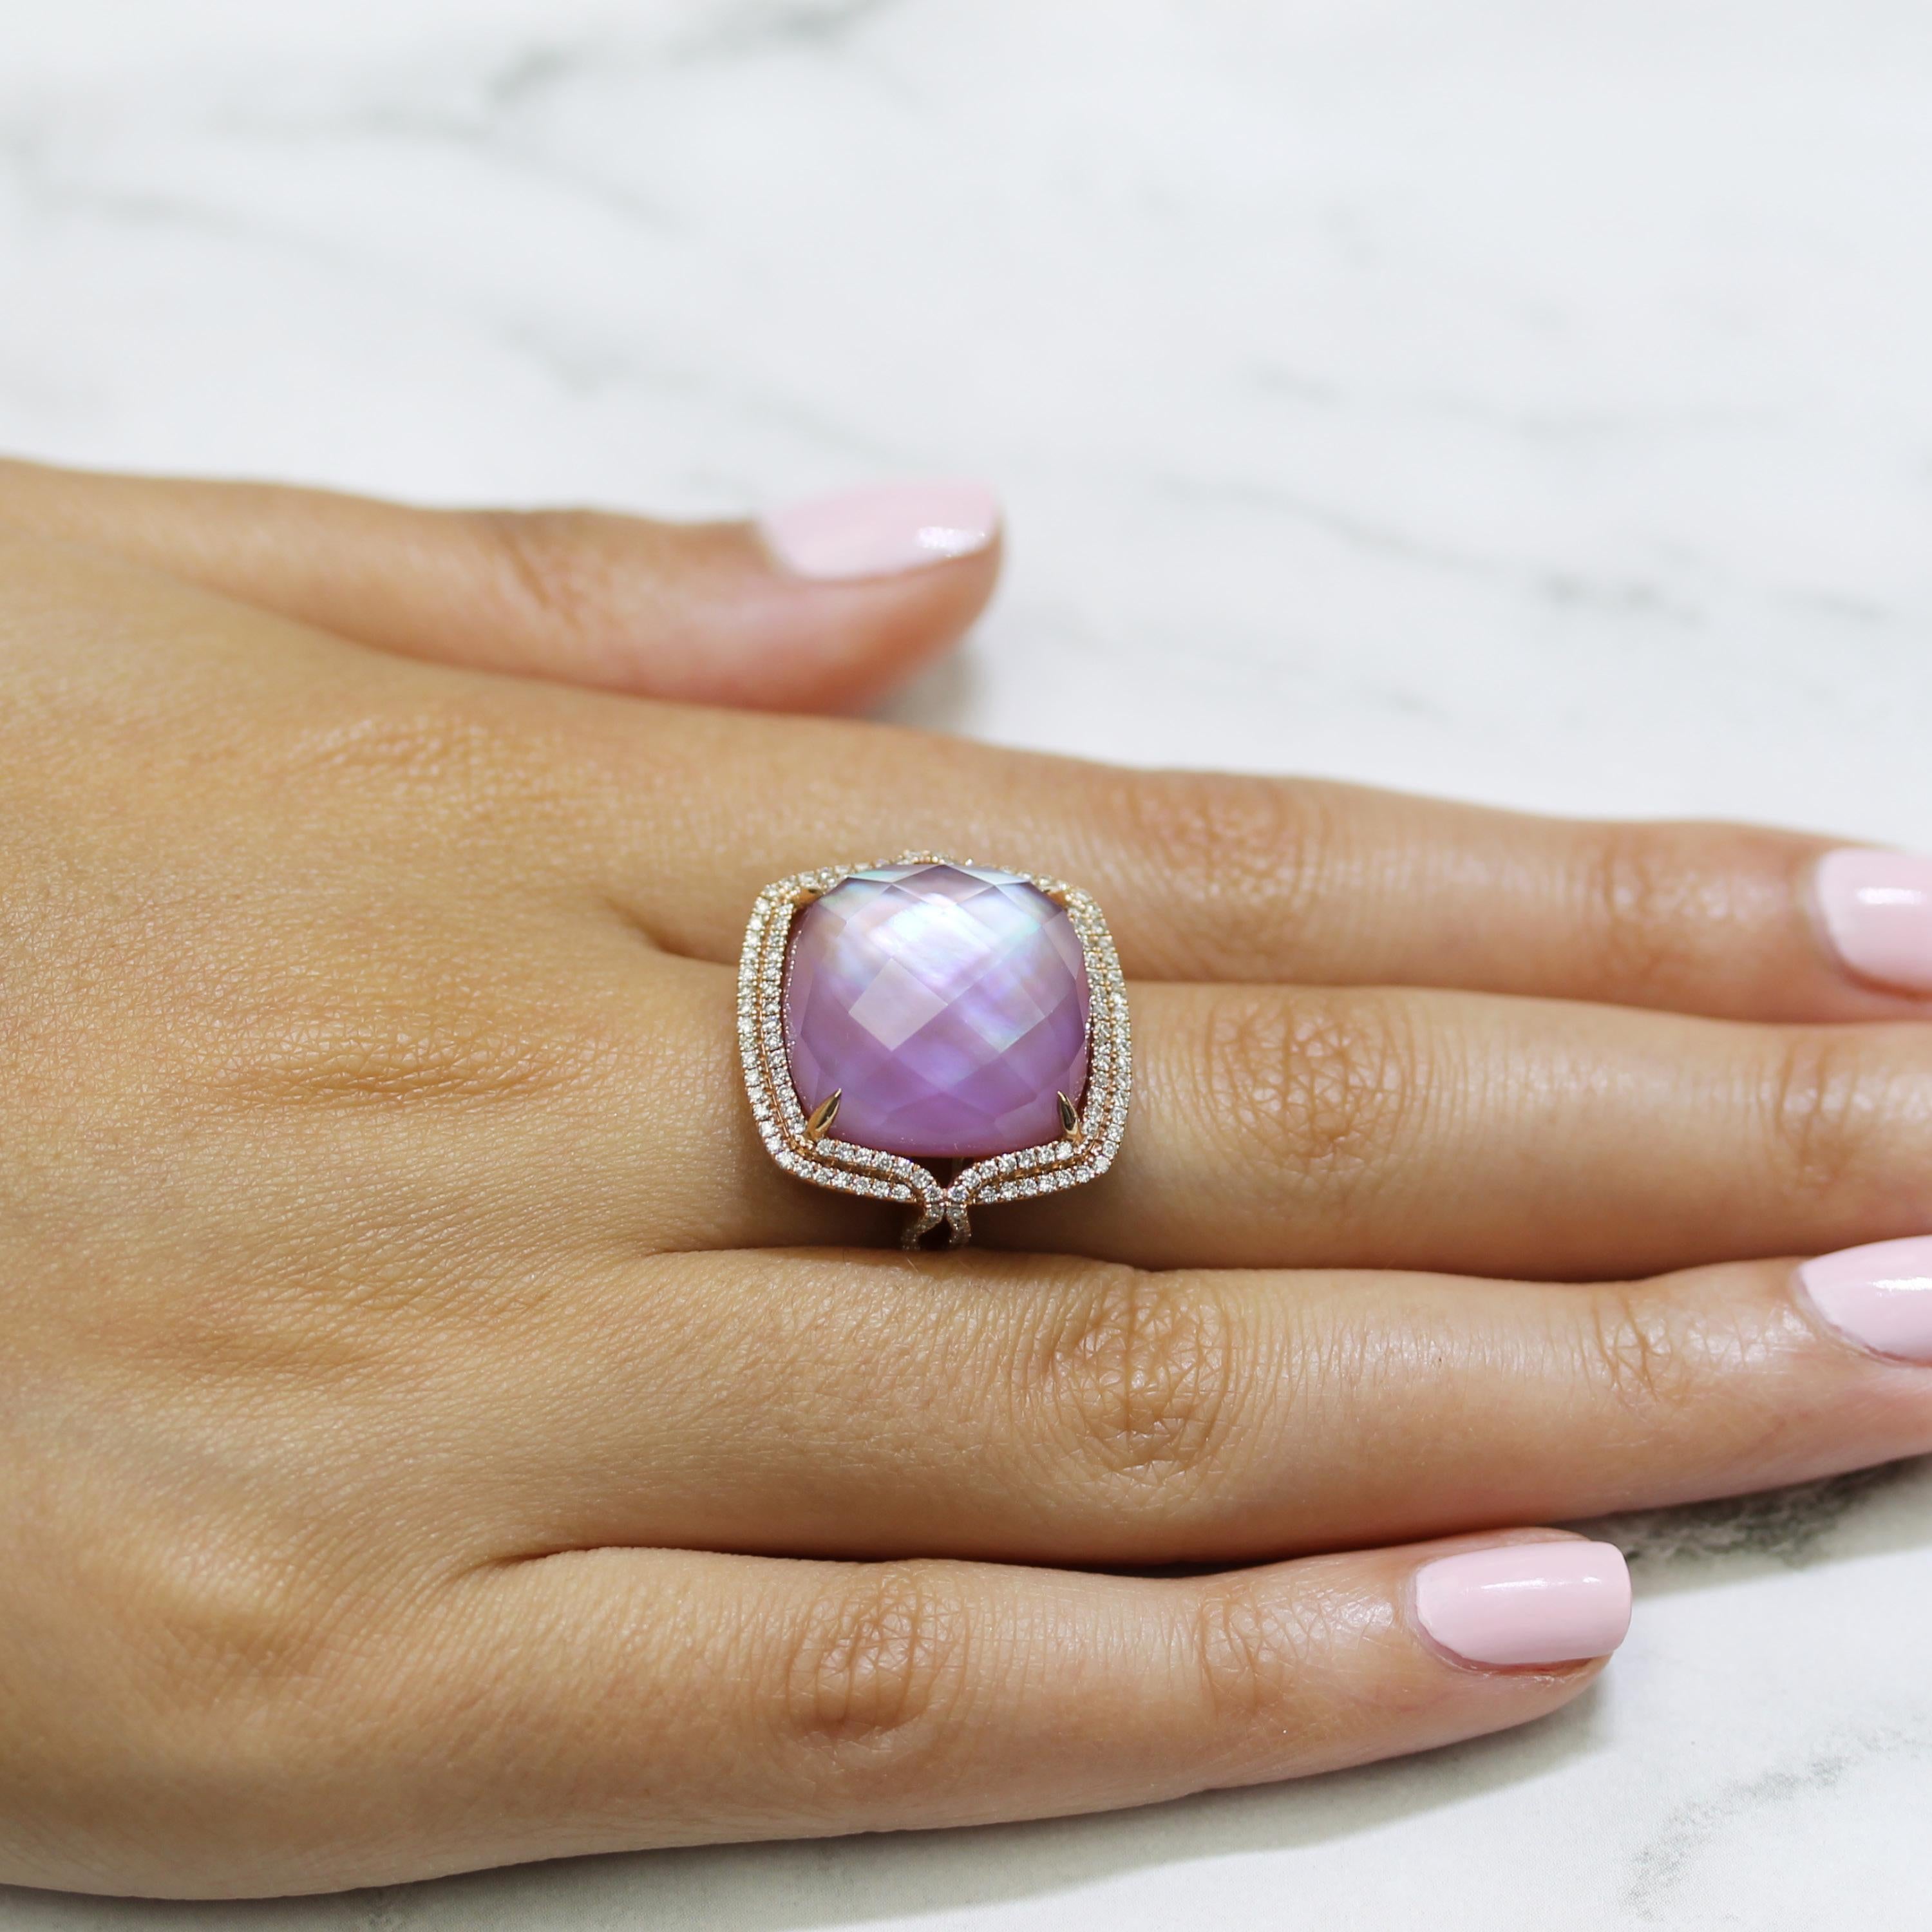 Viola Collection Ring featuring a doublet of checker-cut Round Light Amethyst layered with Pink Mother of Pearl, double Diamond Halo, Split, set in 14K Rose Gold. Finger size 6.5, adjustable upon request/quote. The Viola collection from Doves by